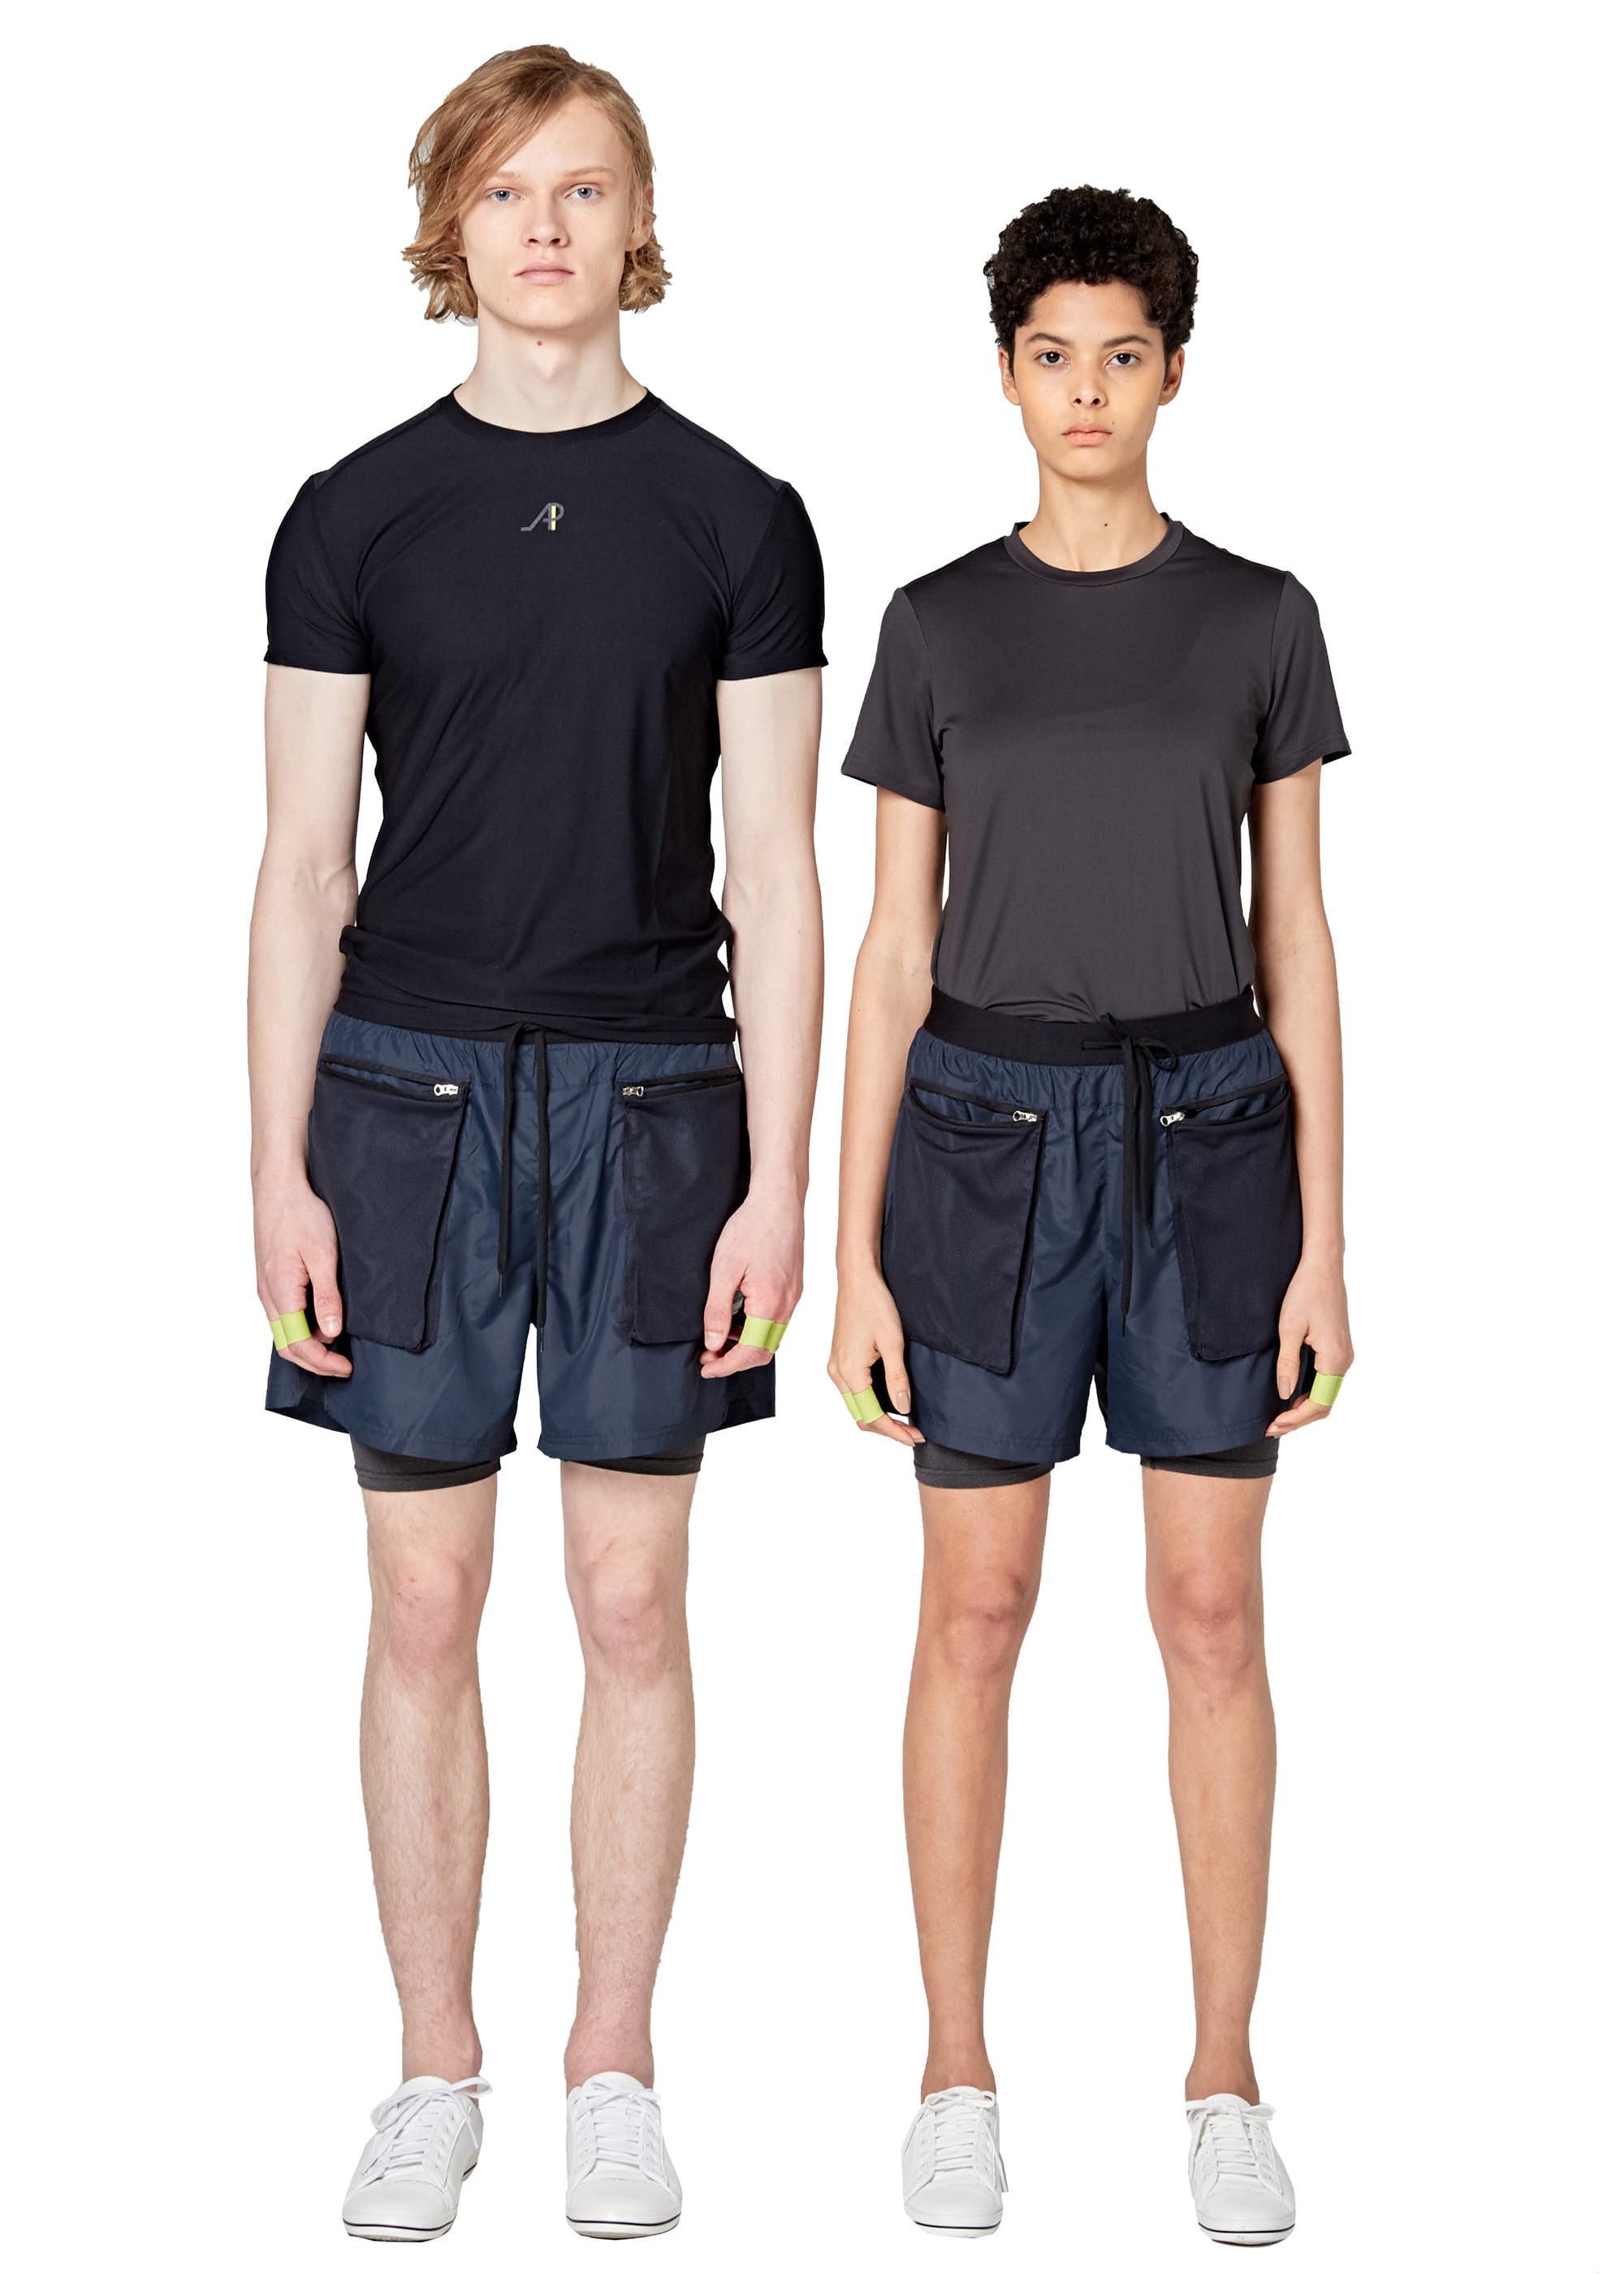 AM01PS022 in 1 BAND RUNNING SHORTS_BLACK